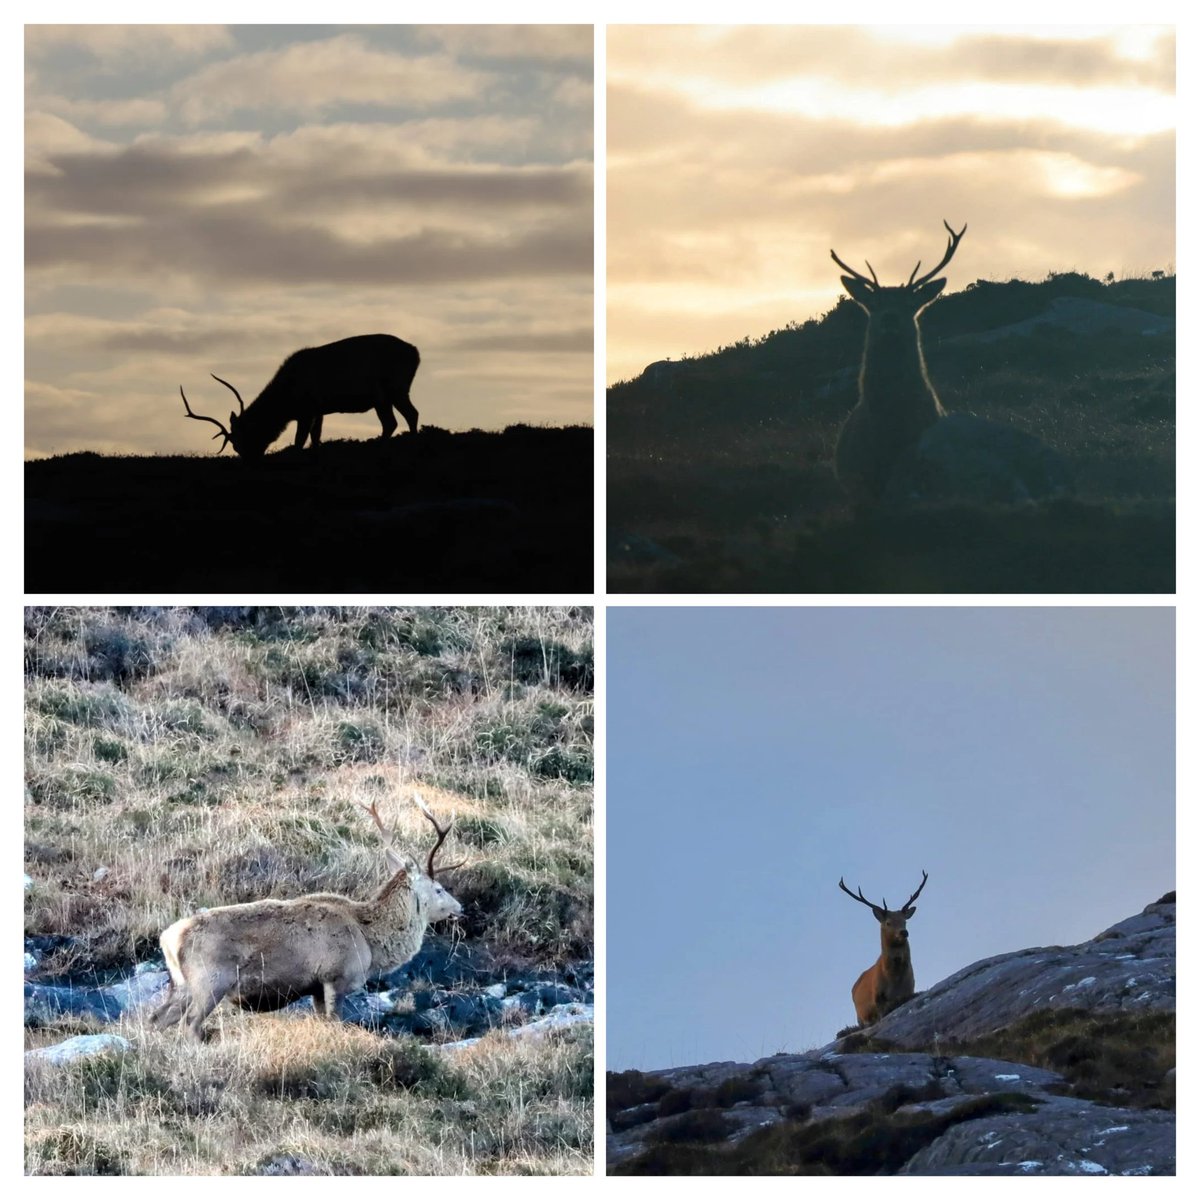 #stags using #NewYearsEve as a day for recuperation after the passing storms ##northharris #westernisles @HI_Voices